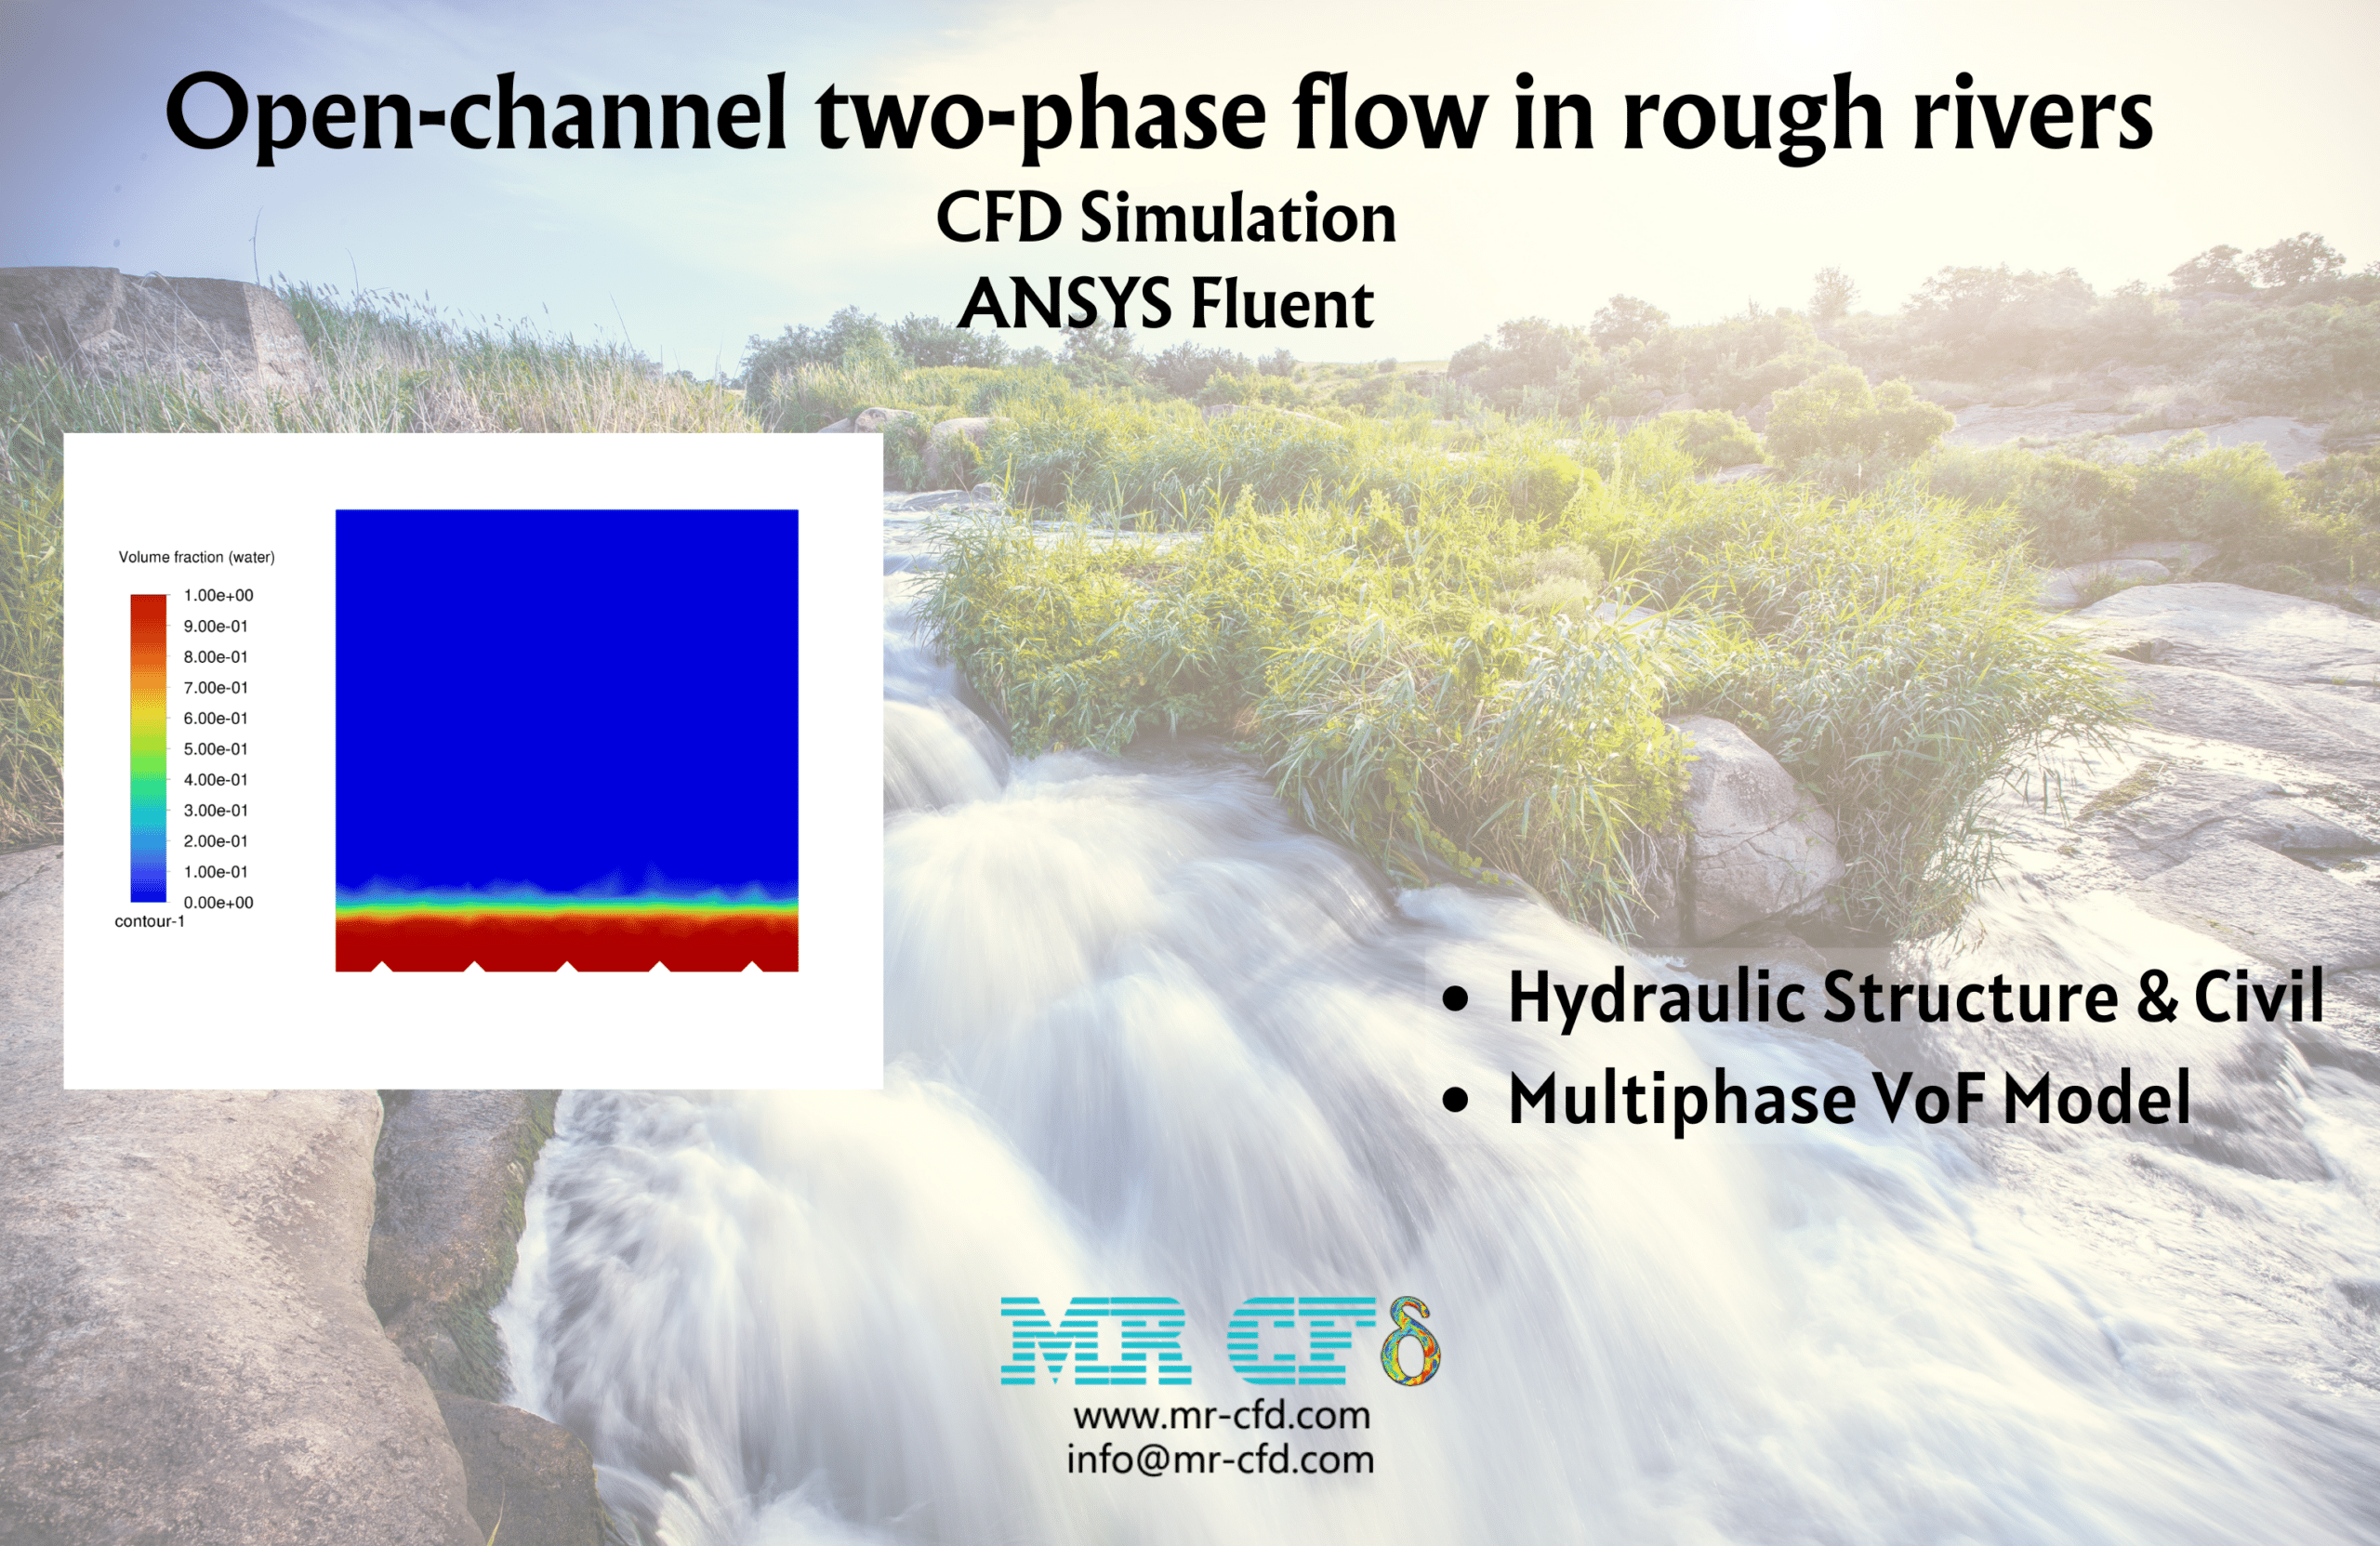 Open-channel two-phase flow in rough rivers CFD Simulation, ANSYS Fluent